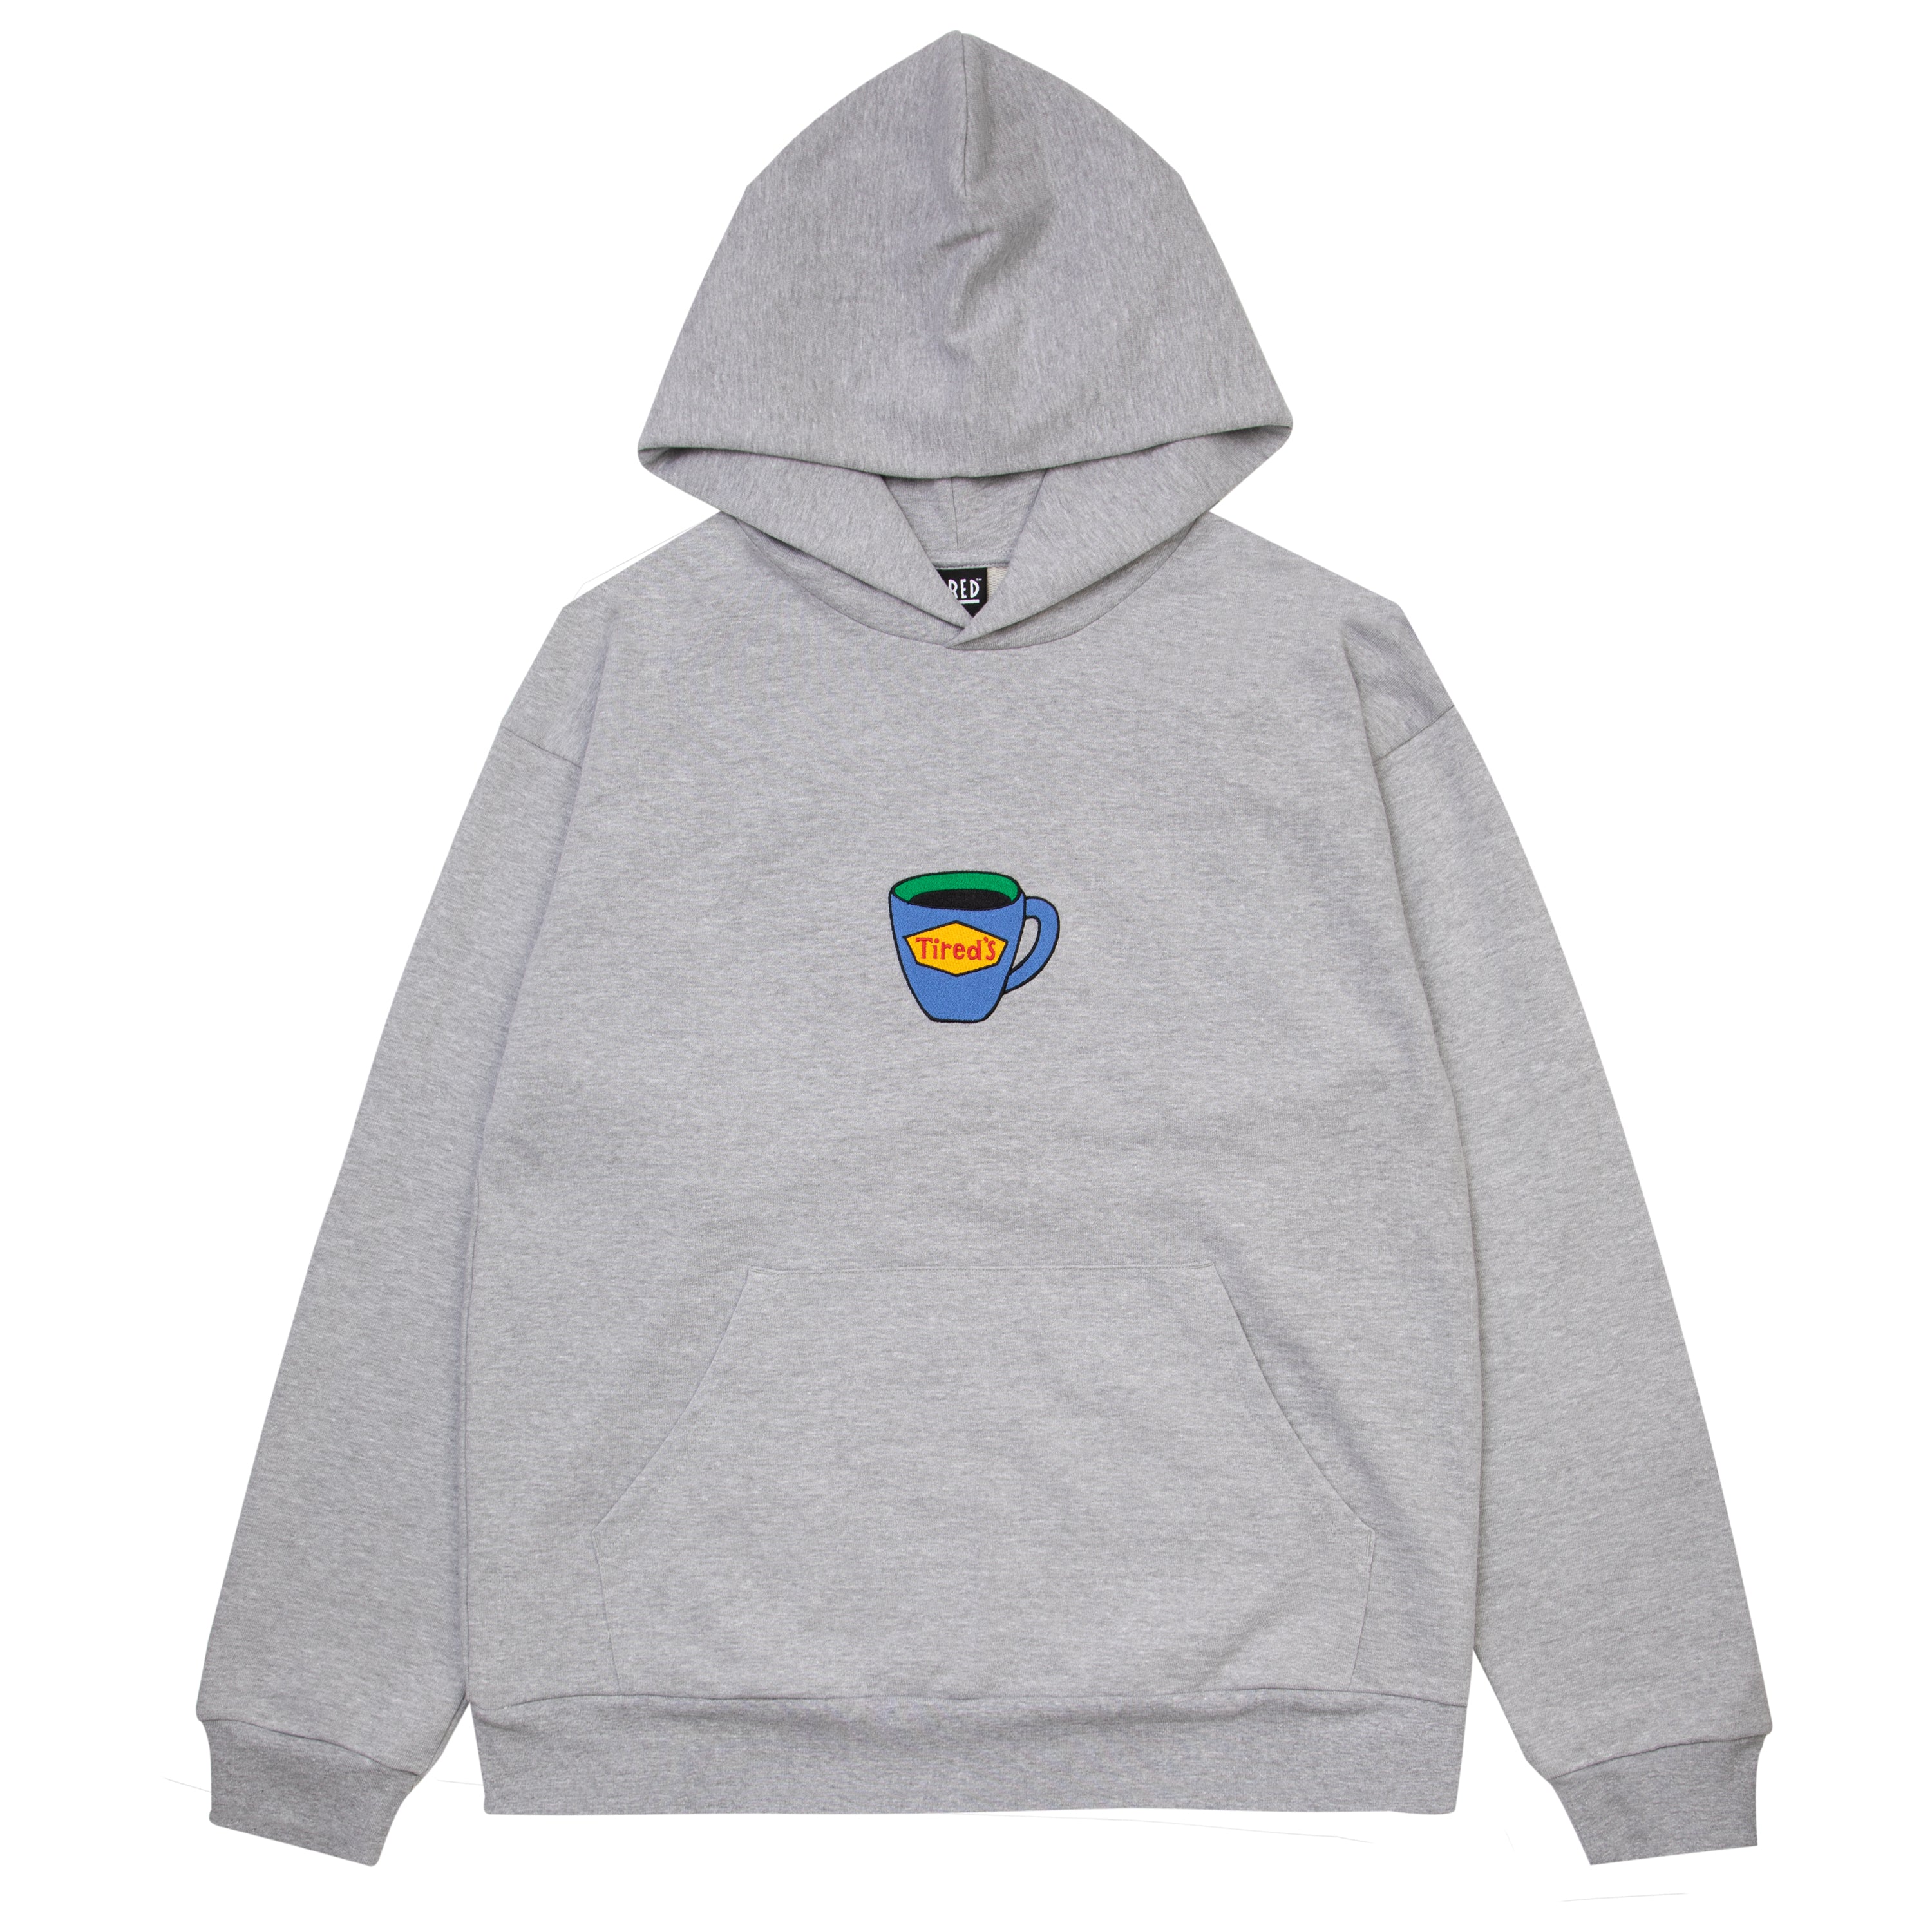 – GREY skateboards TIRED\'S HOODIE tired HEATHER